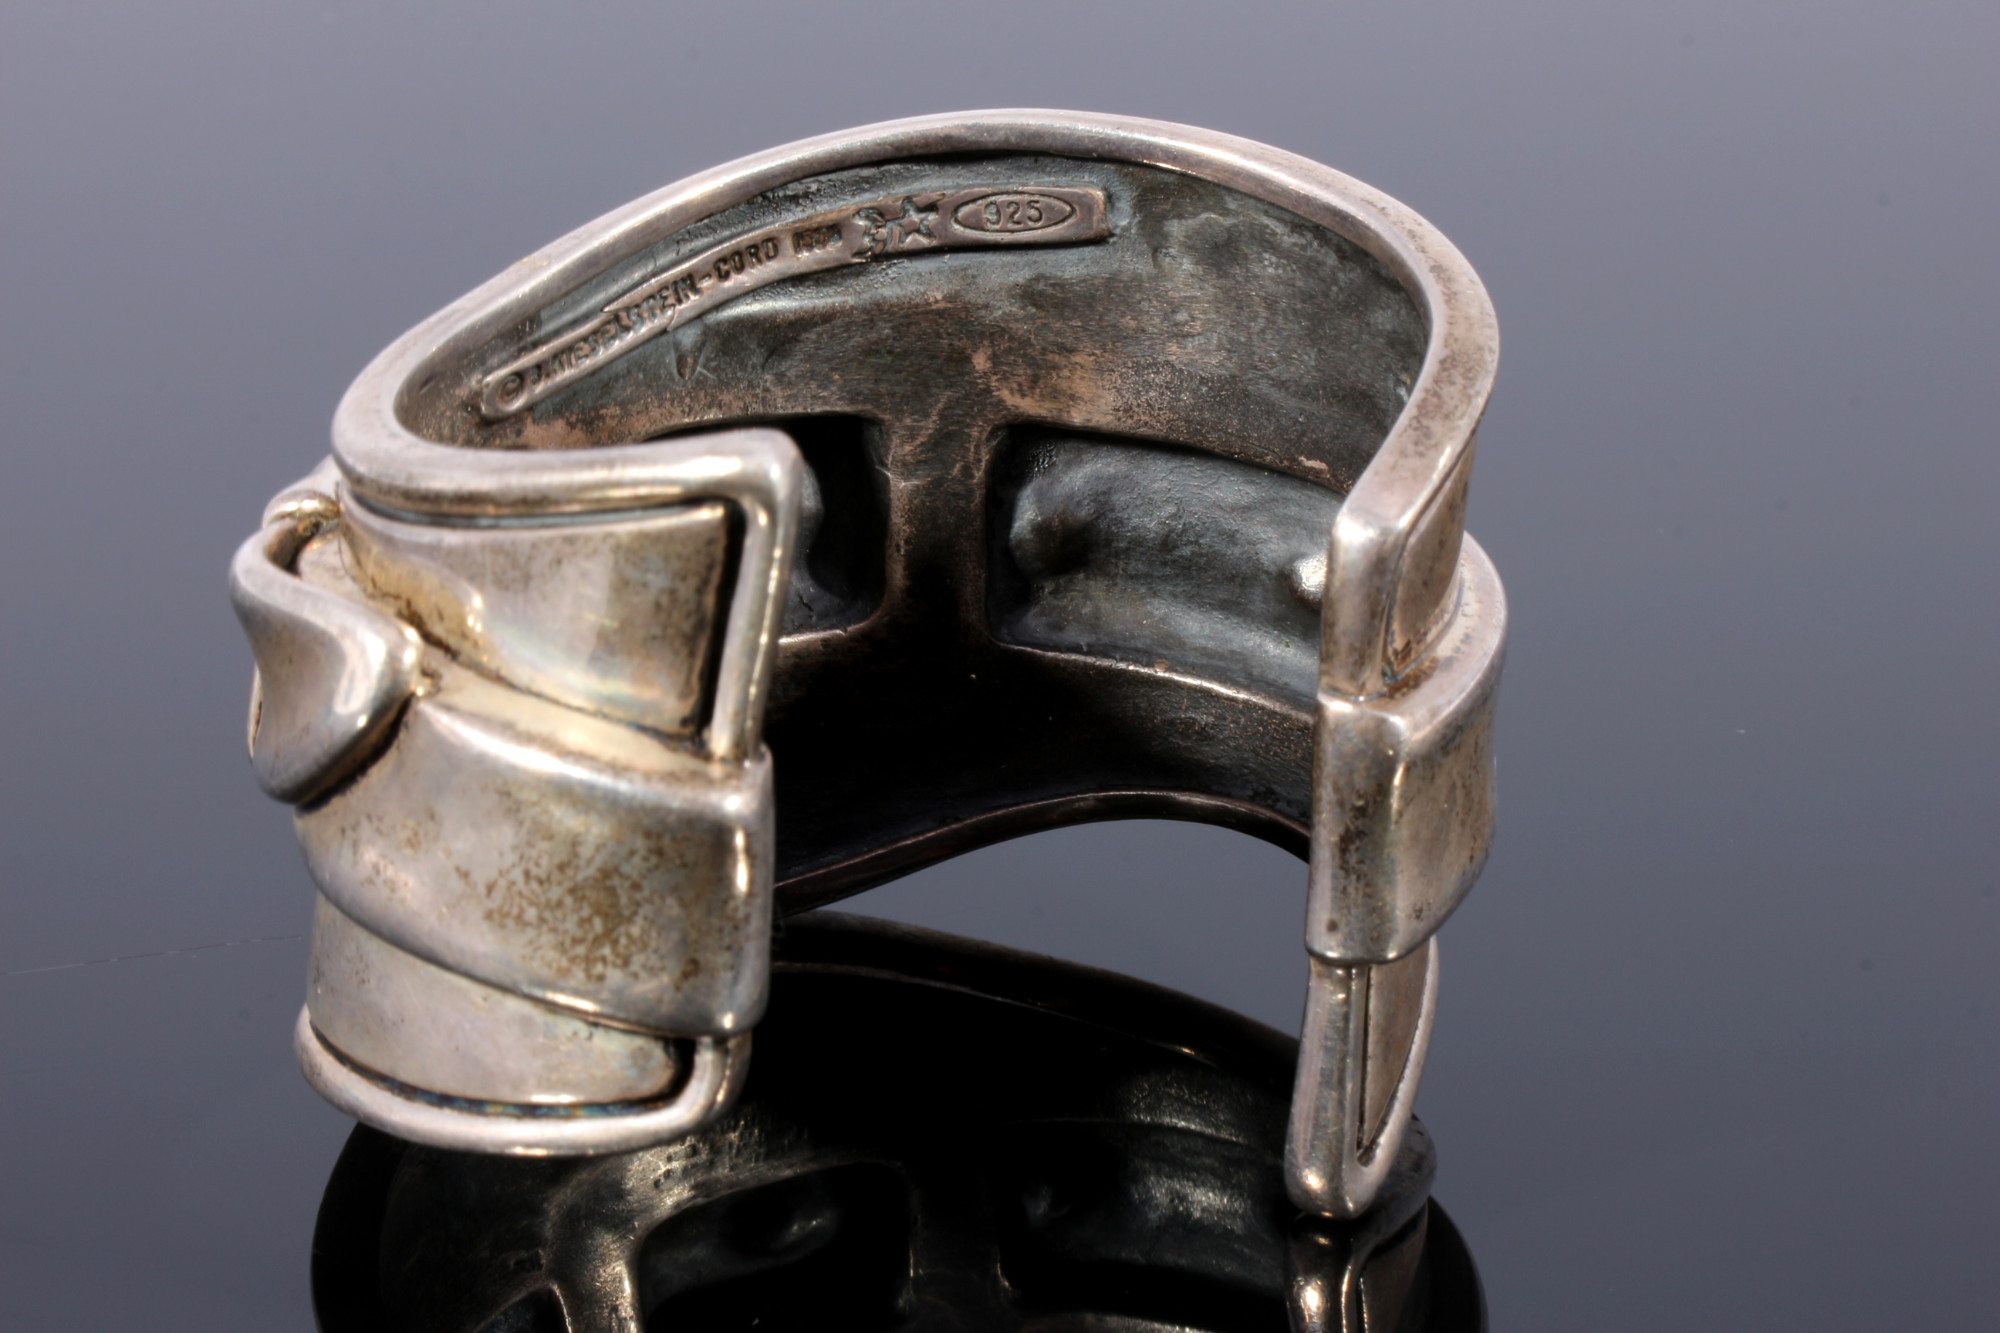 Barry Kieselstein-Cord 925 sterling silver design bangle with beltbuckle, Silber Design Armreif, - Image 3 of 4